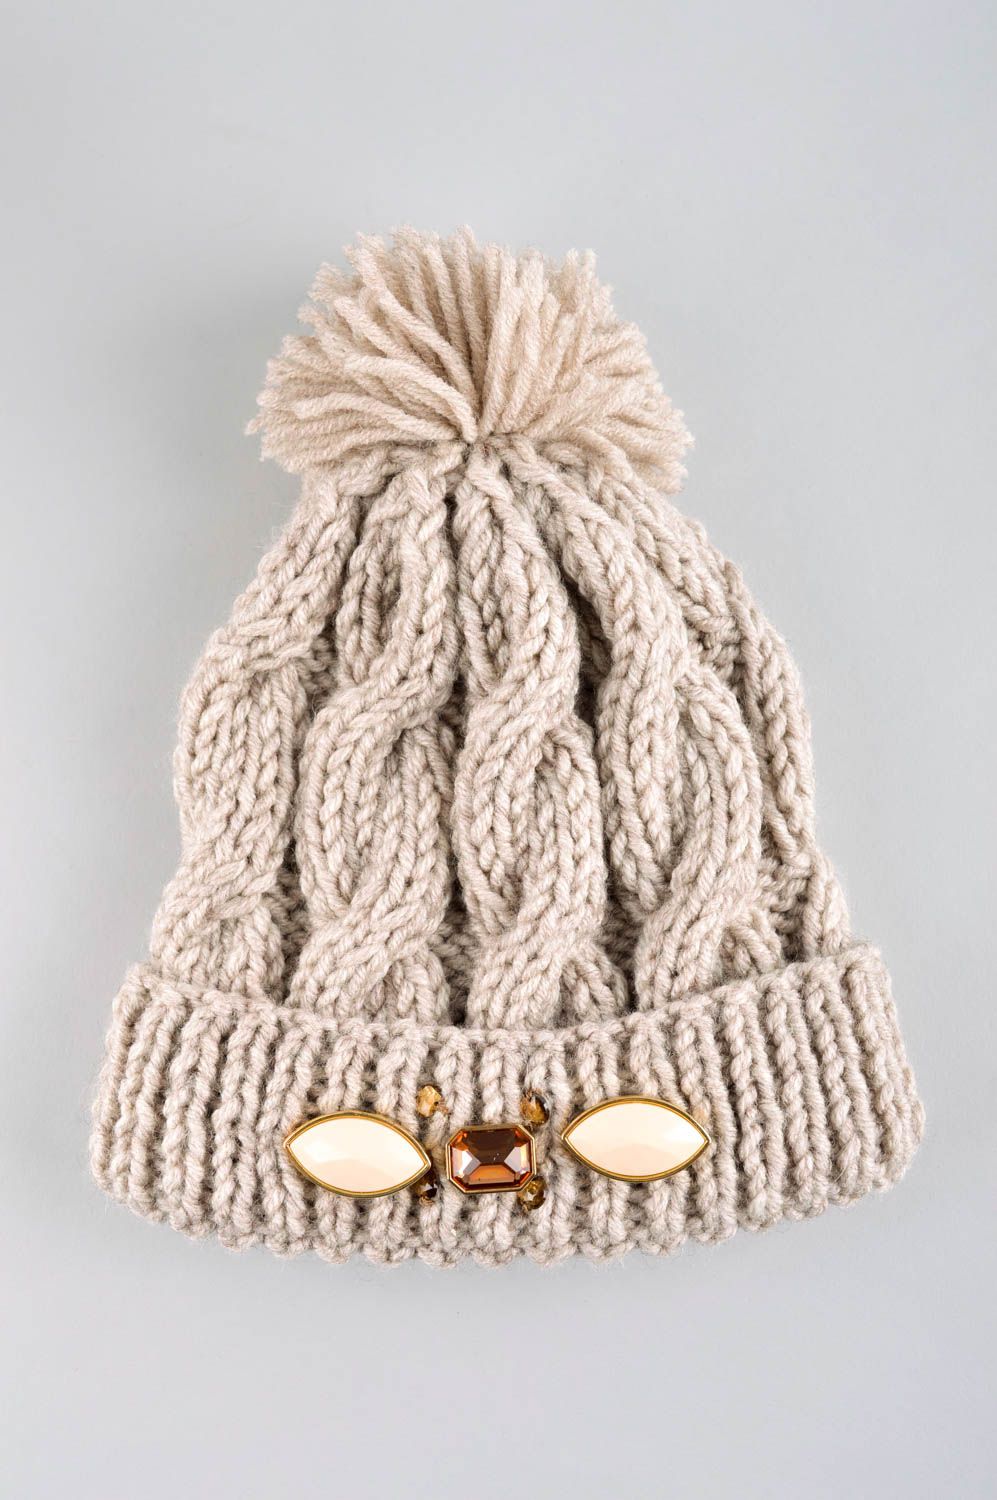 Handmade cute winter cap knitted warm accessories stylish hat for women photo 5